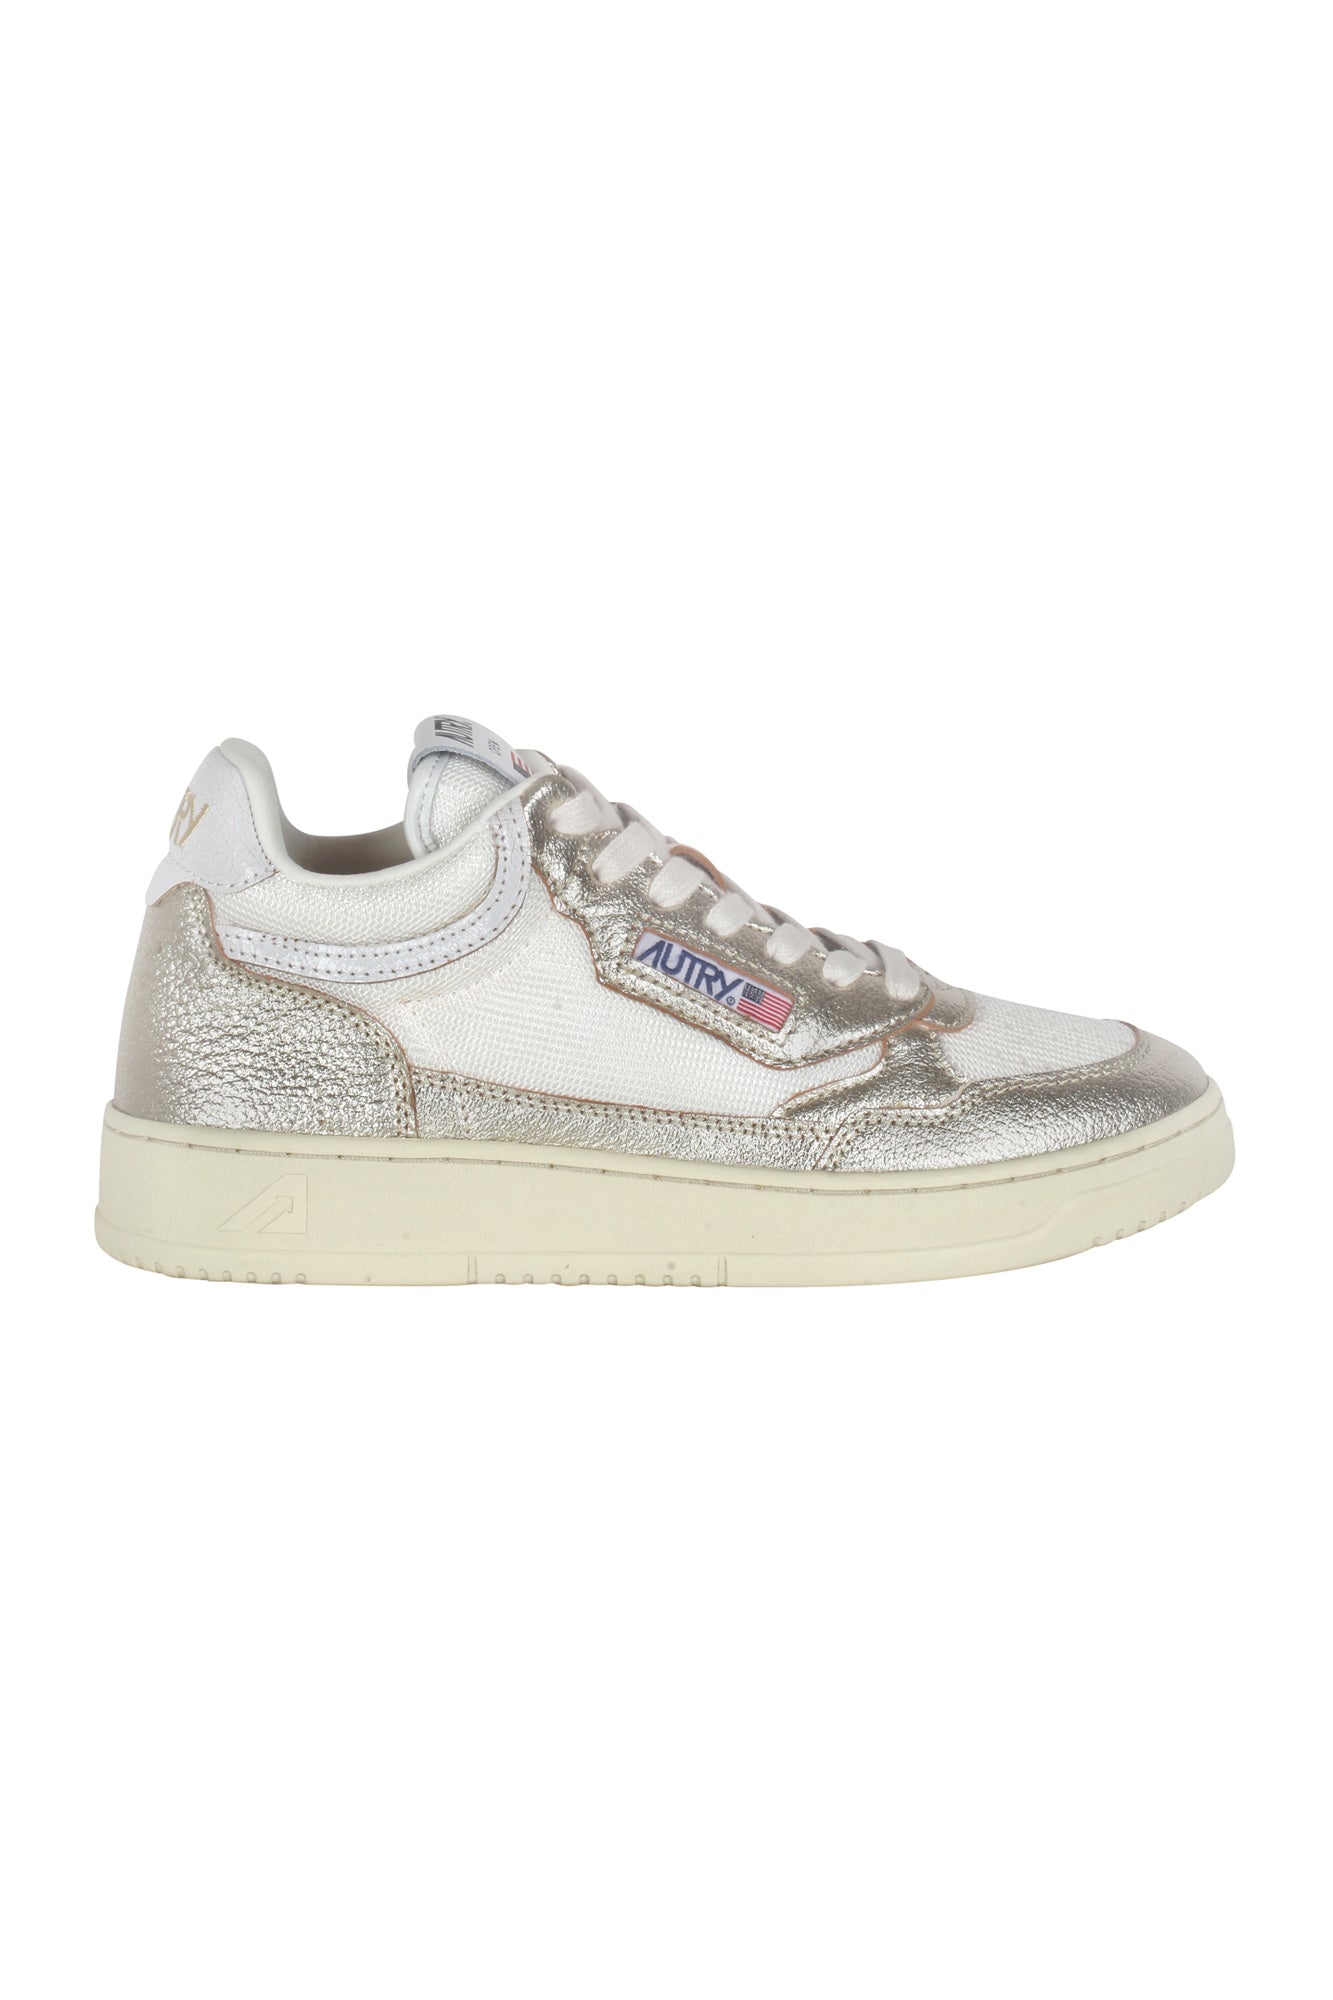 Autry - Sneakers - 430015 - Bianco/Platino